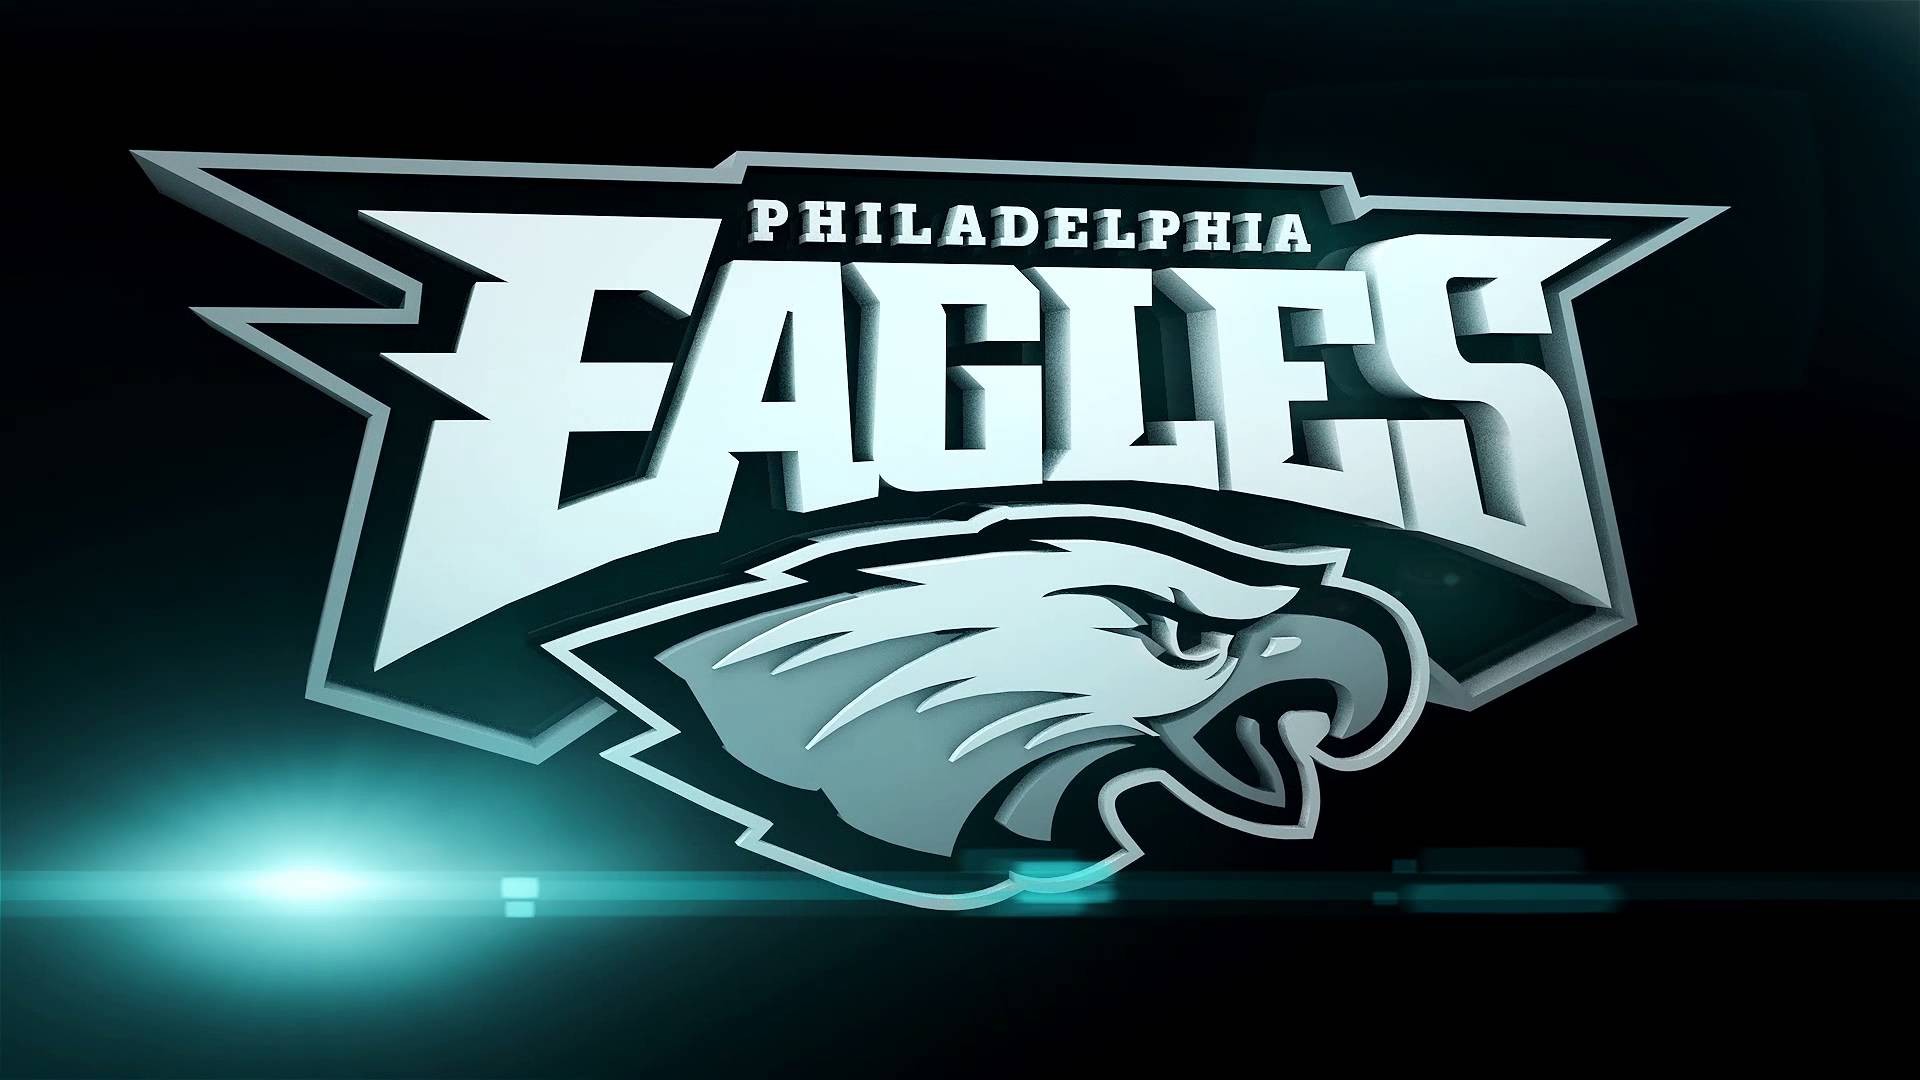 Philadelphia Eagles Mac Backgrounds with resolution 1920x1080 pixel. You can make this wallpaper for your Mac or Windows Desktop Background, iPhone, Android or Tablet and another Smartphone device